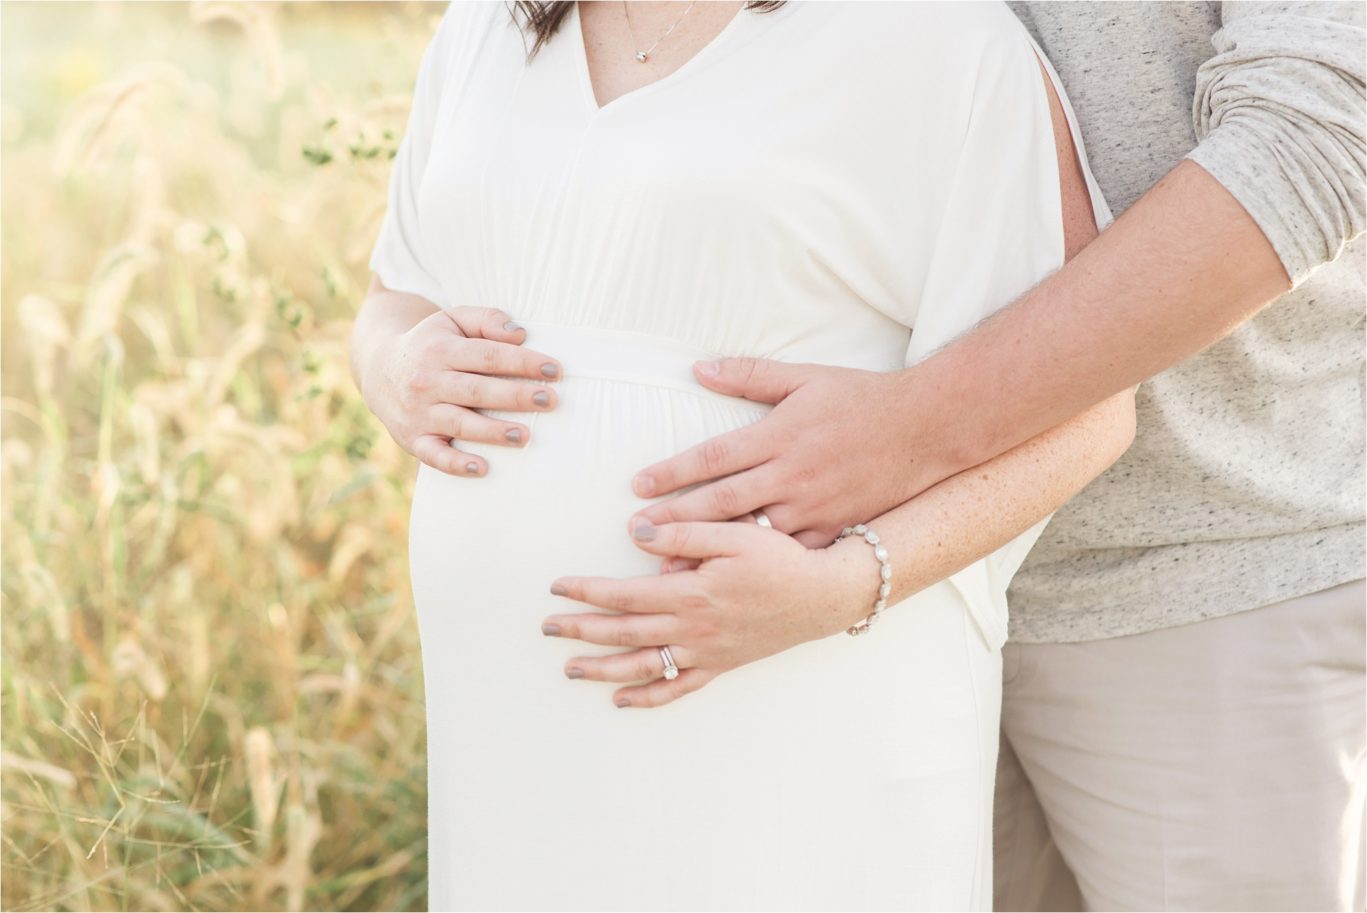 outdoor maternity session in indianapolis at sunset with natural light by lindsay konopa photography